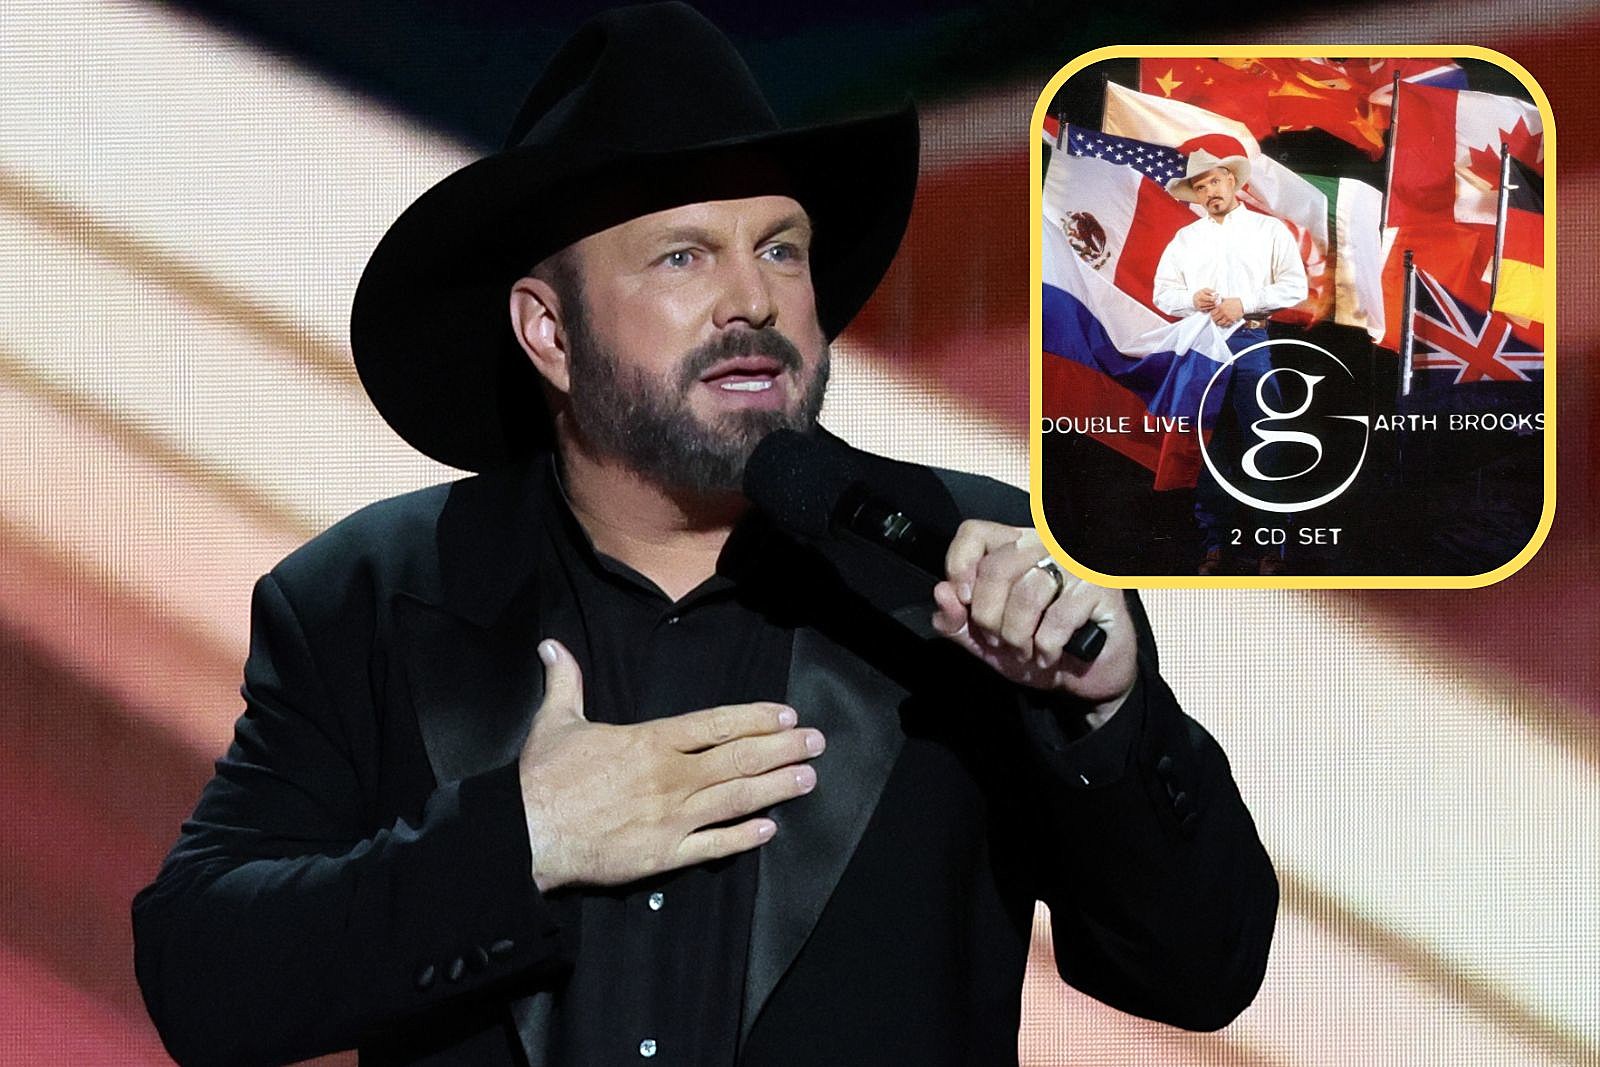 Has Anyone on the Internet Listened to Garth Brooks' New Album Released  Exclusively on CD Through Bass Pro Shops? An Investigation